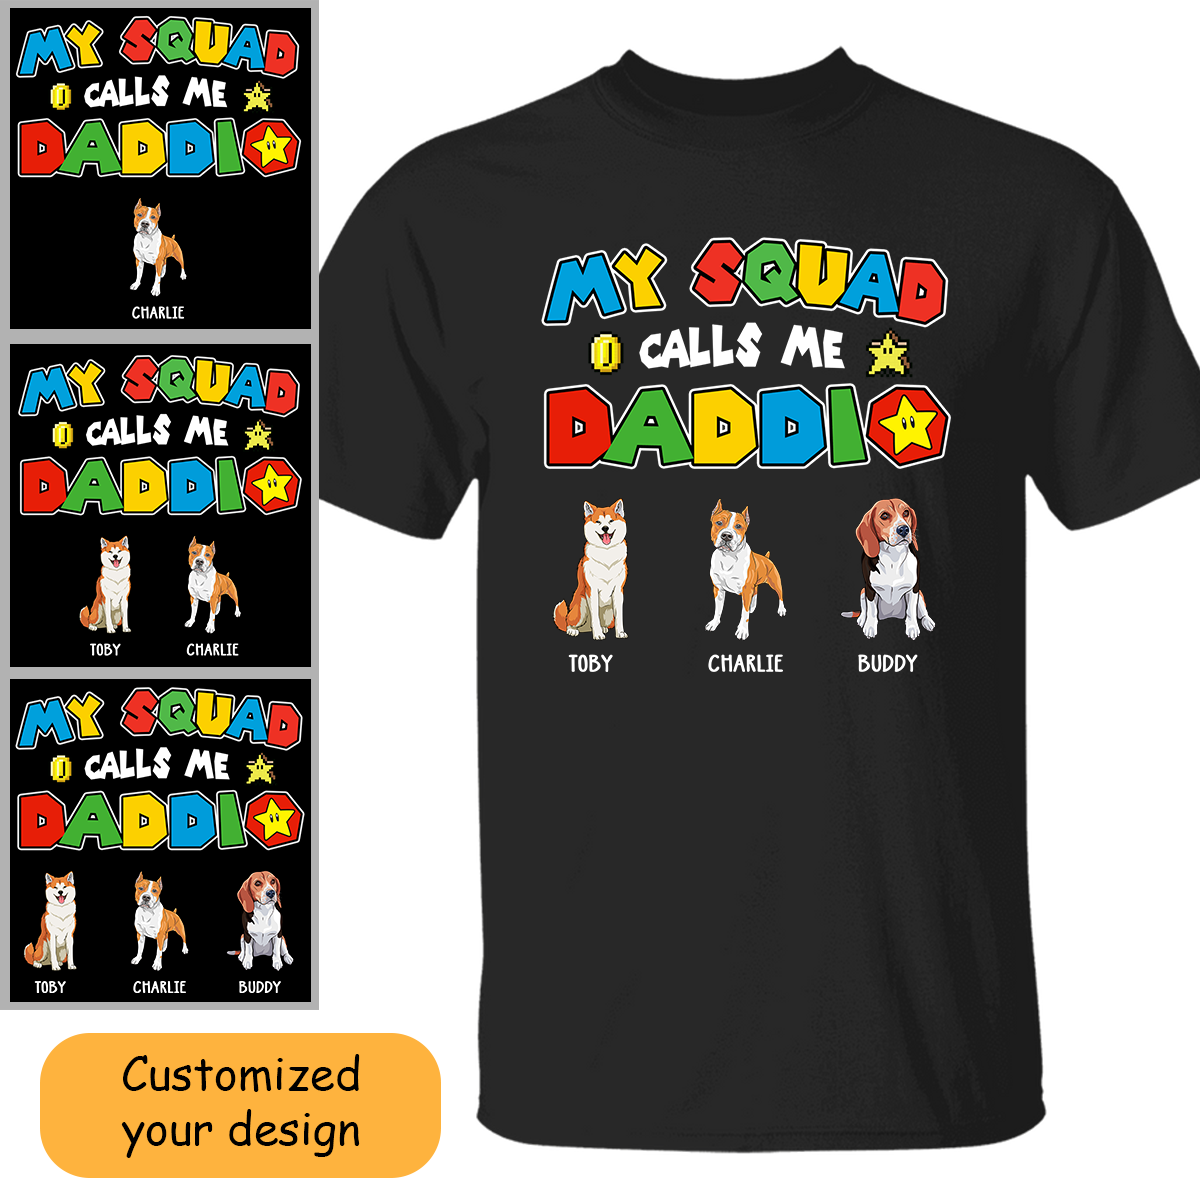 Customized Dog Dad Shirt Hoodie My Squad Calls Me Daddio For Dad, For Husband, For Father, Grandpa, Father's Day Gift, For Dog Lovers